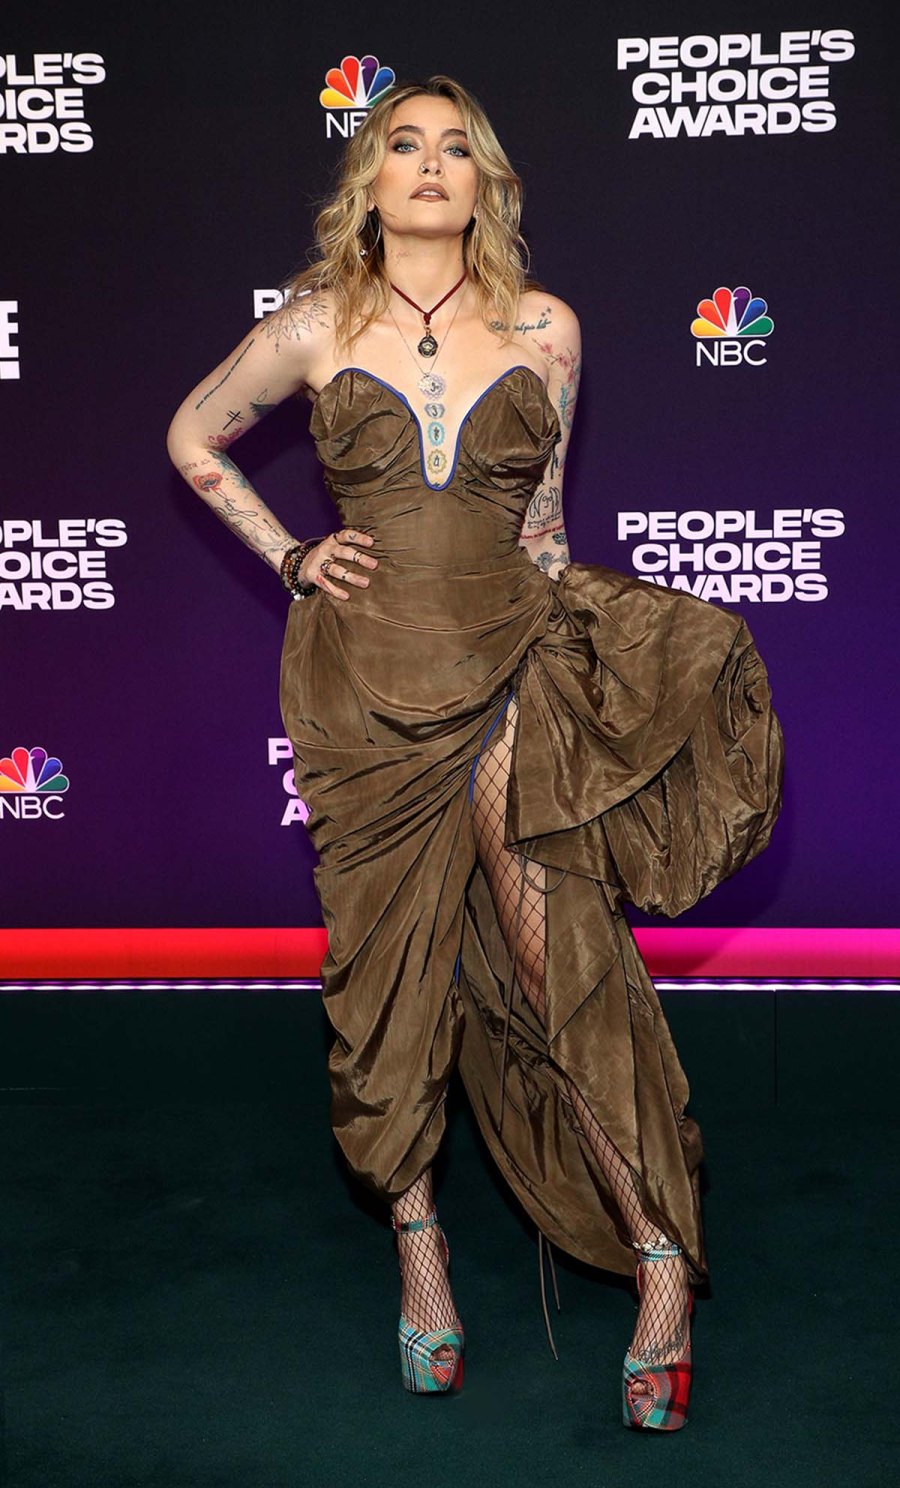 2021 Peoples Choice Awards See What Stars Wore Peoples Choice Awards